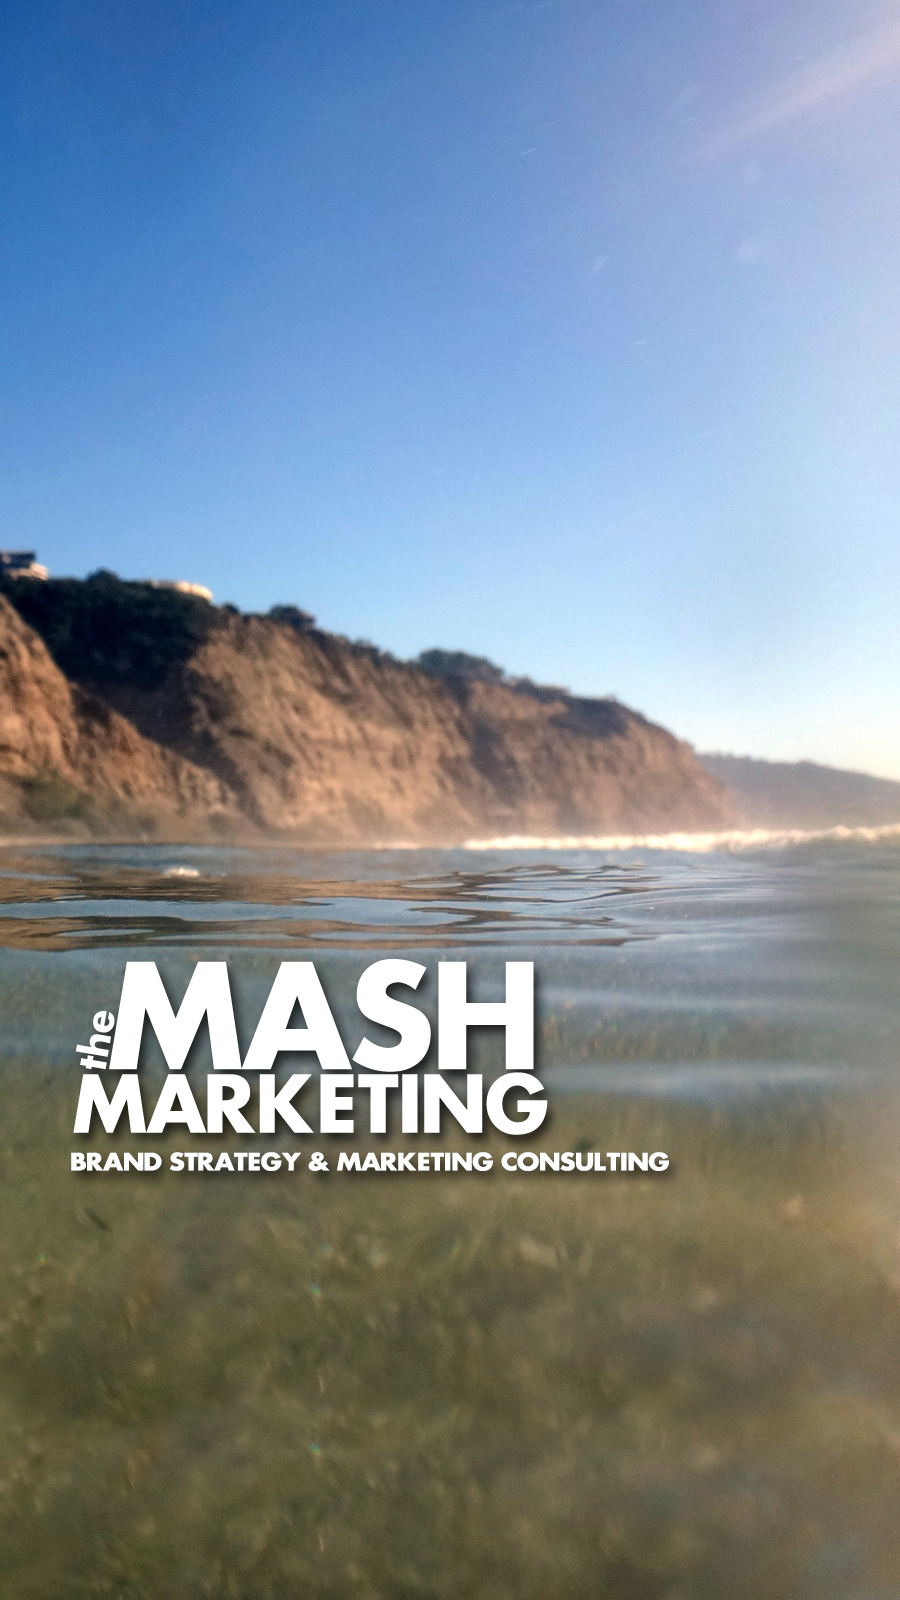 The Mash Marketing - Brand Strategy and Marketing Consulting in San Diego